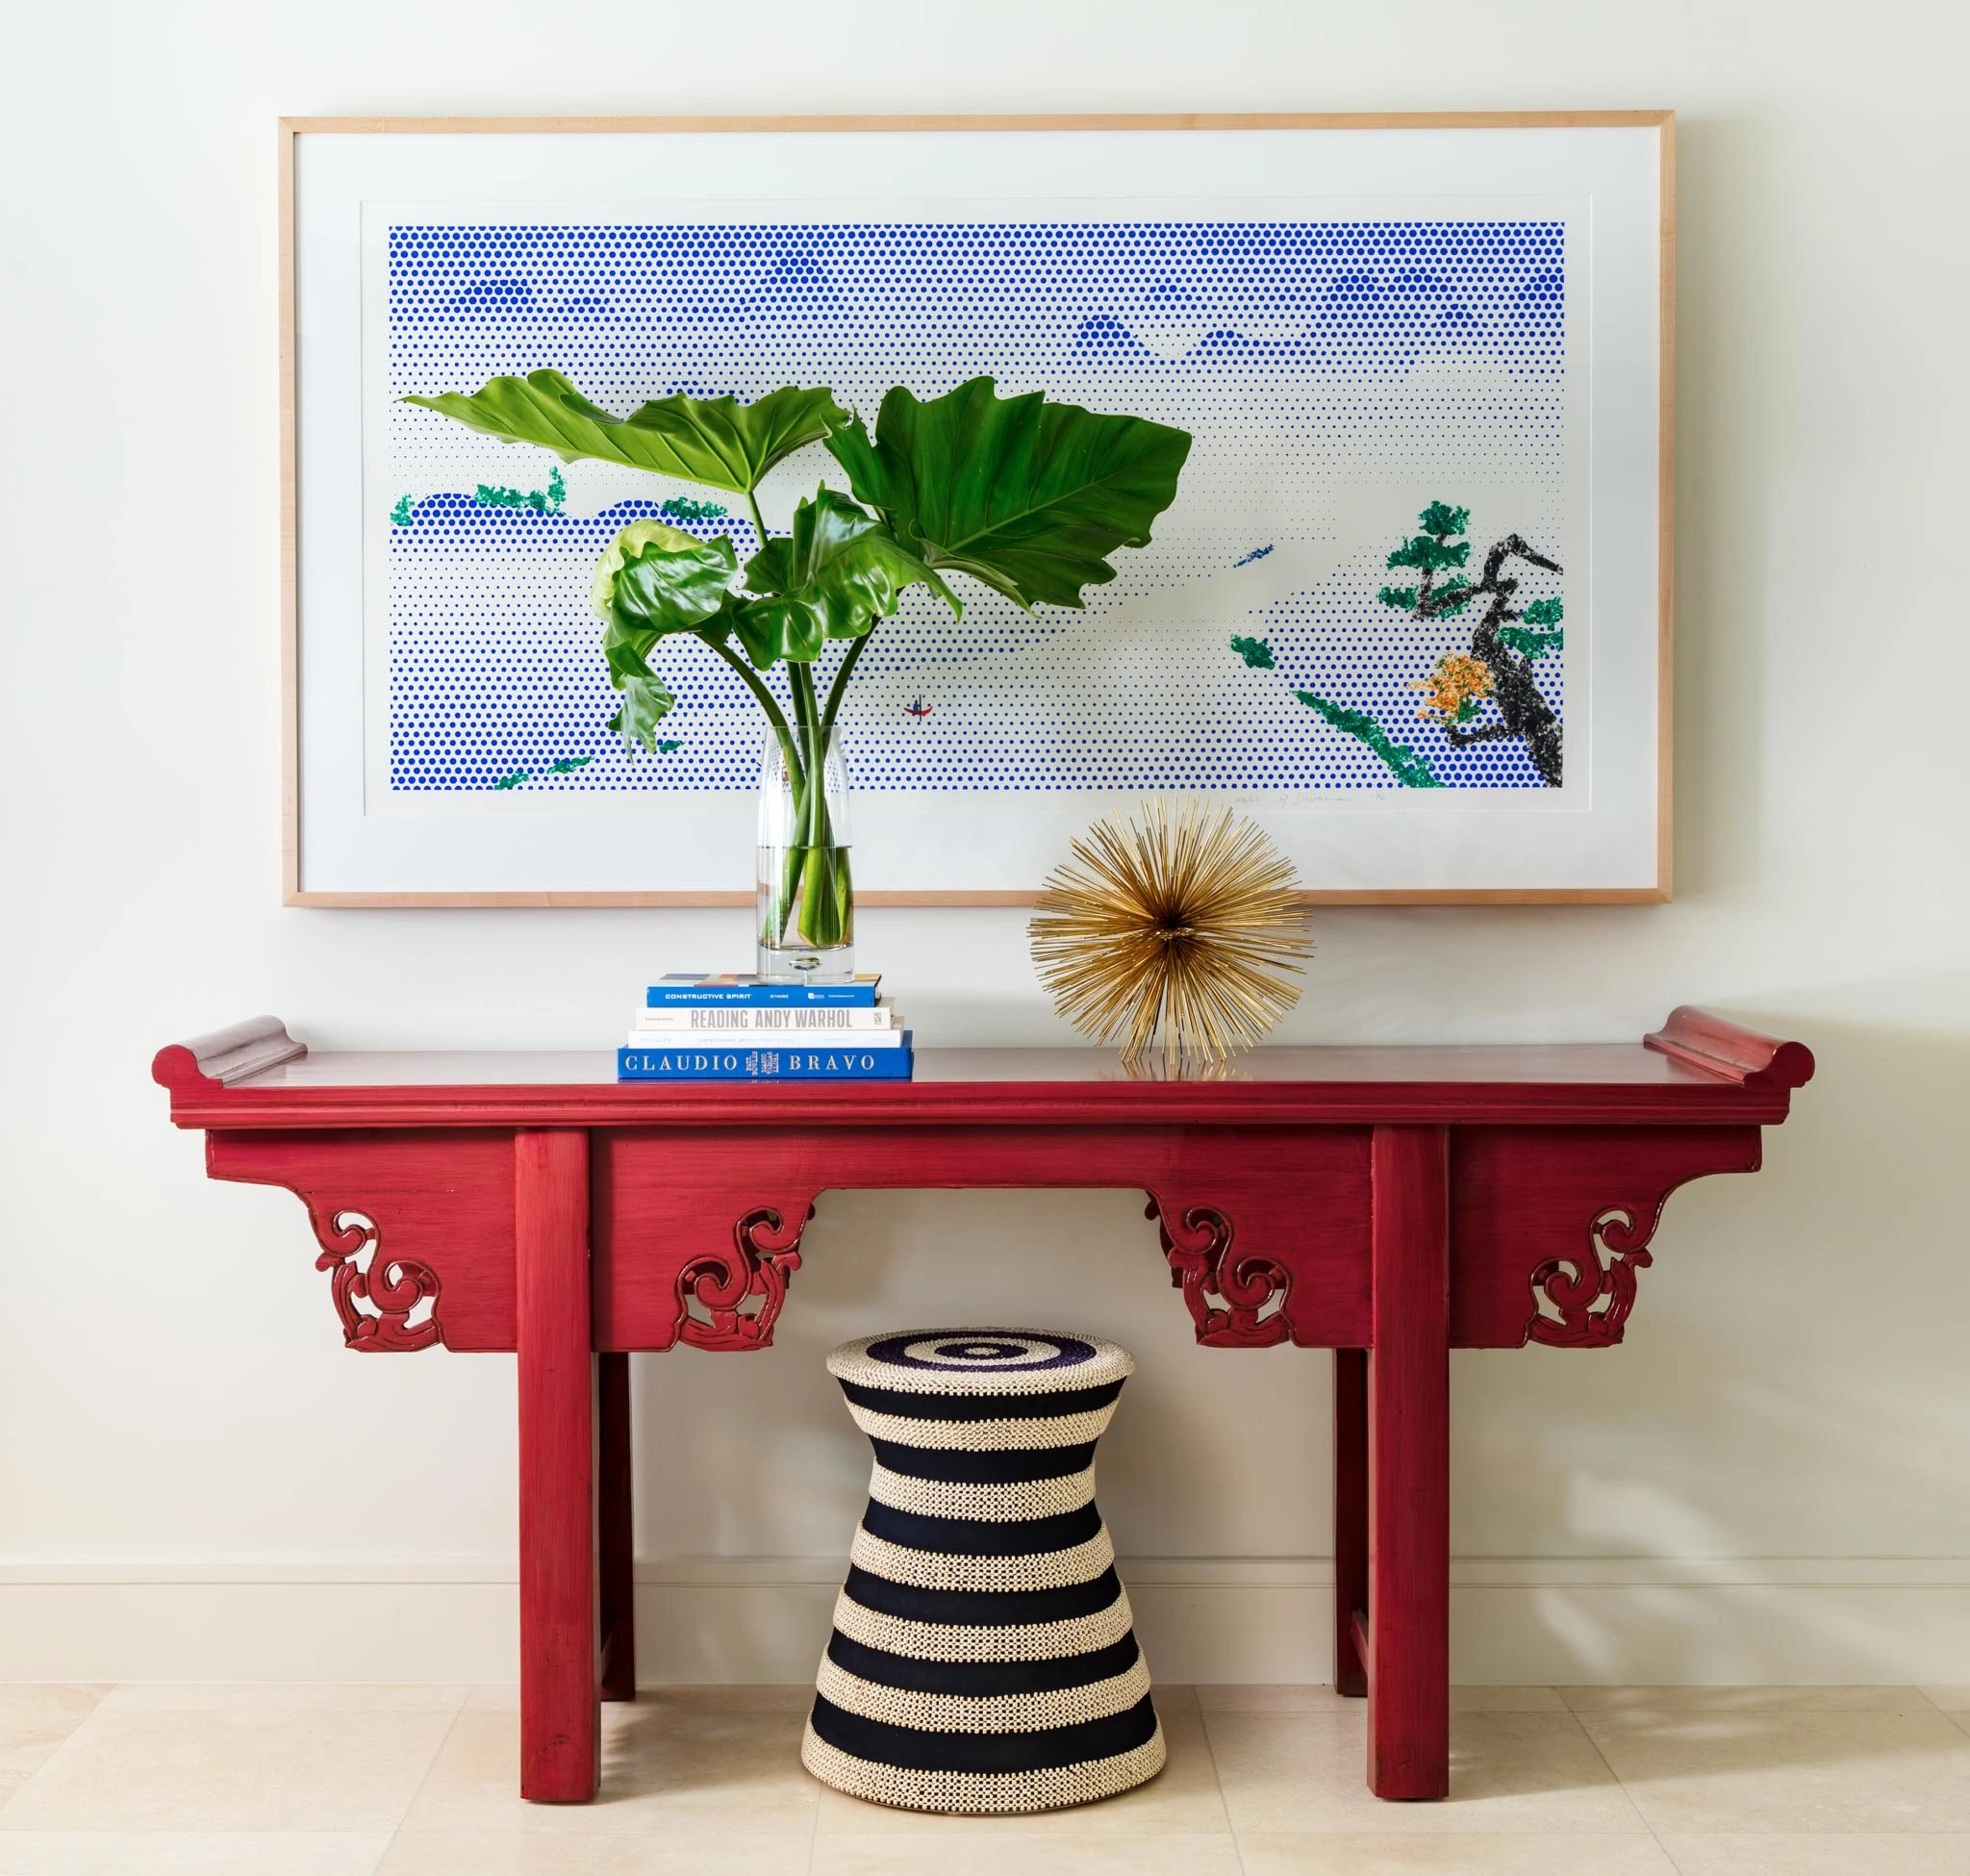 Step-by-step guide. Gorgeous red console table in a bright hallway. There is a blue landscape art piece hanging above the table. On the table, there are books, a plant, and a gold decorative ball that looks like a sea urchin. Under the table sits a black and white striped decorative foot stool.